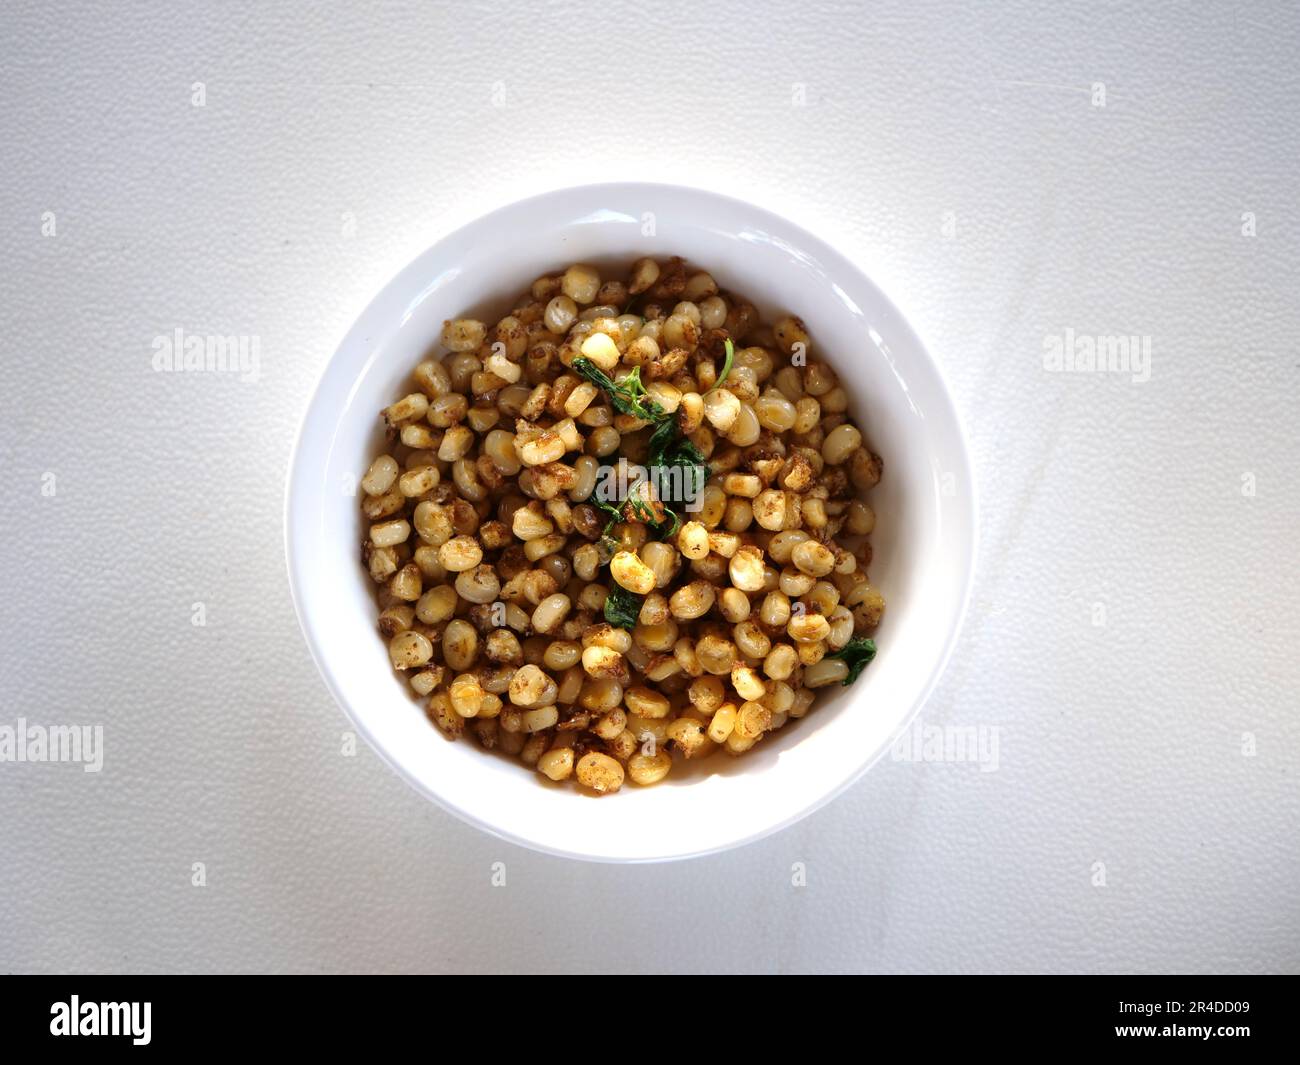 Jagung pulut or Corn pulut is a typical food from East Nusa Tenggara made from fried white corn mixed with salt and basil leaves. Stock Photo